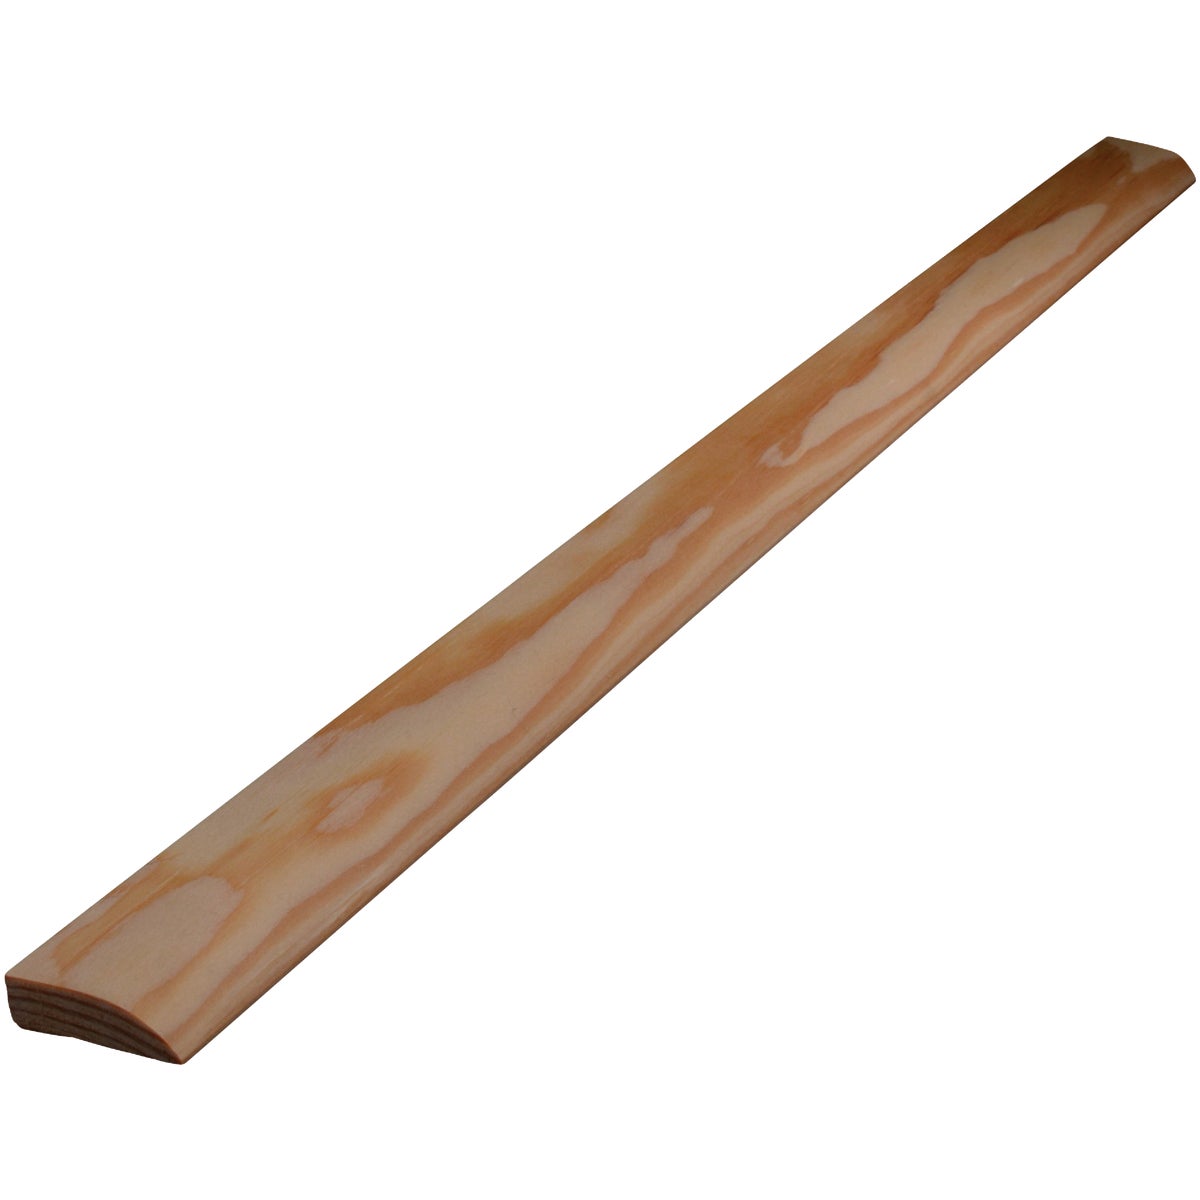 Alexandria Moulding 7/16 In. W. x 1-3/8 In. H. x 7 Ft. L. Solid Pine Ranch Stop Molding